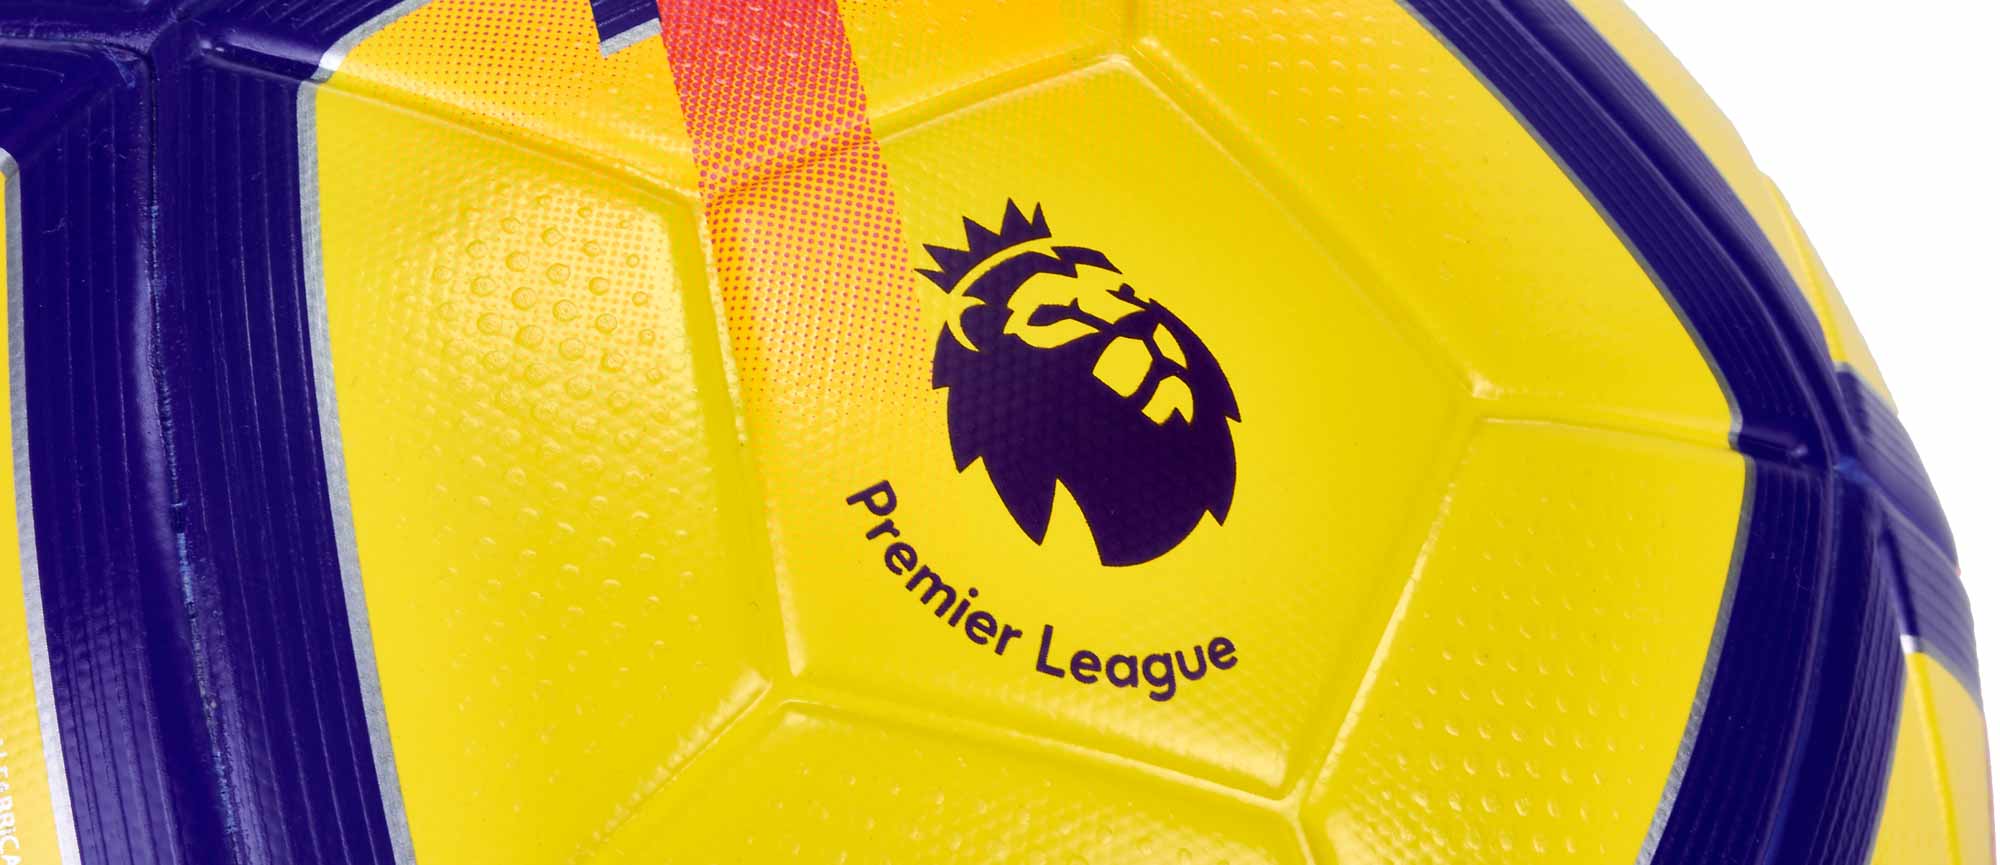 2019-20 Premier League Official Match Issue Nike Ordem Ball (Very Good) 5